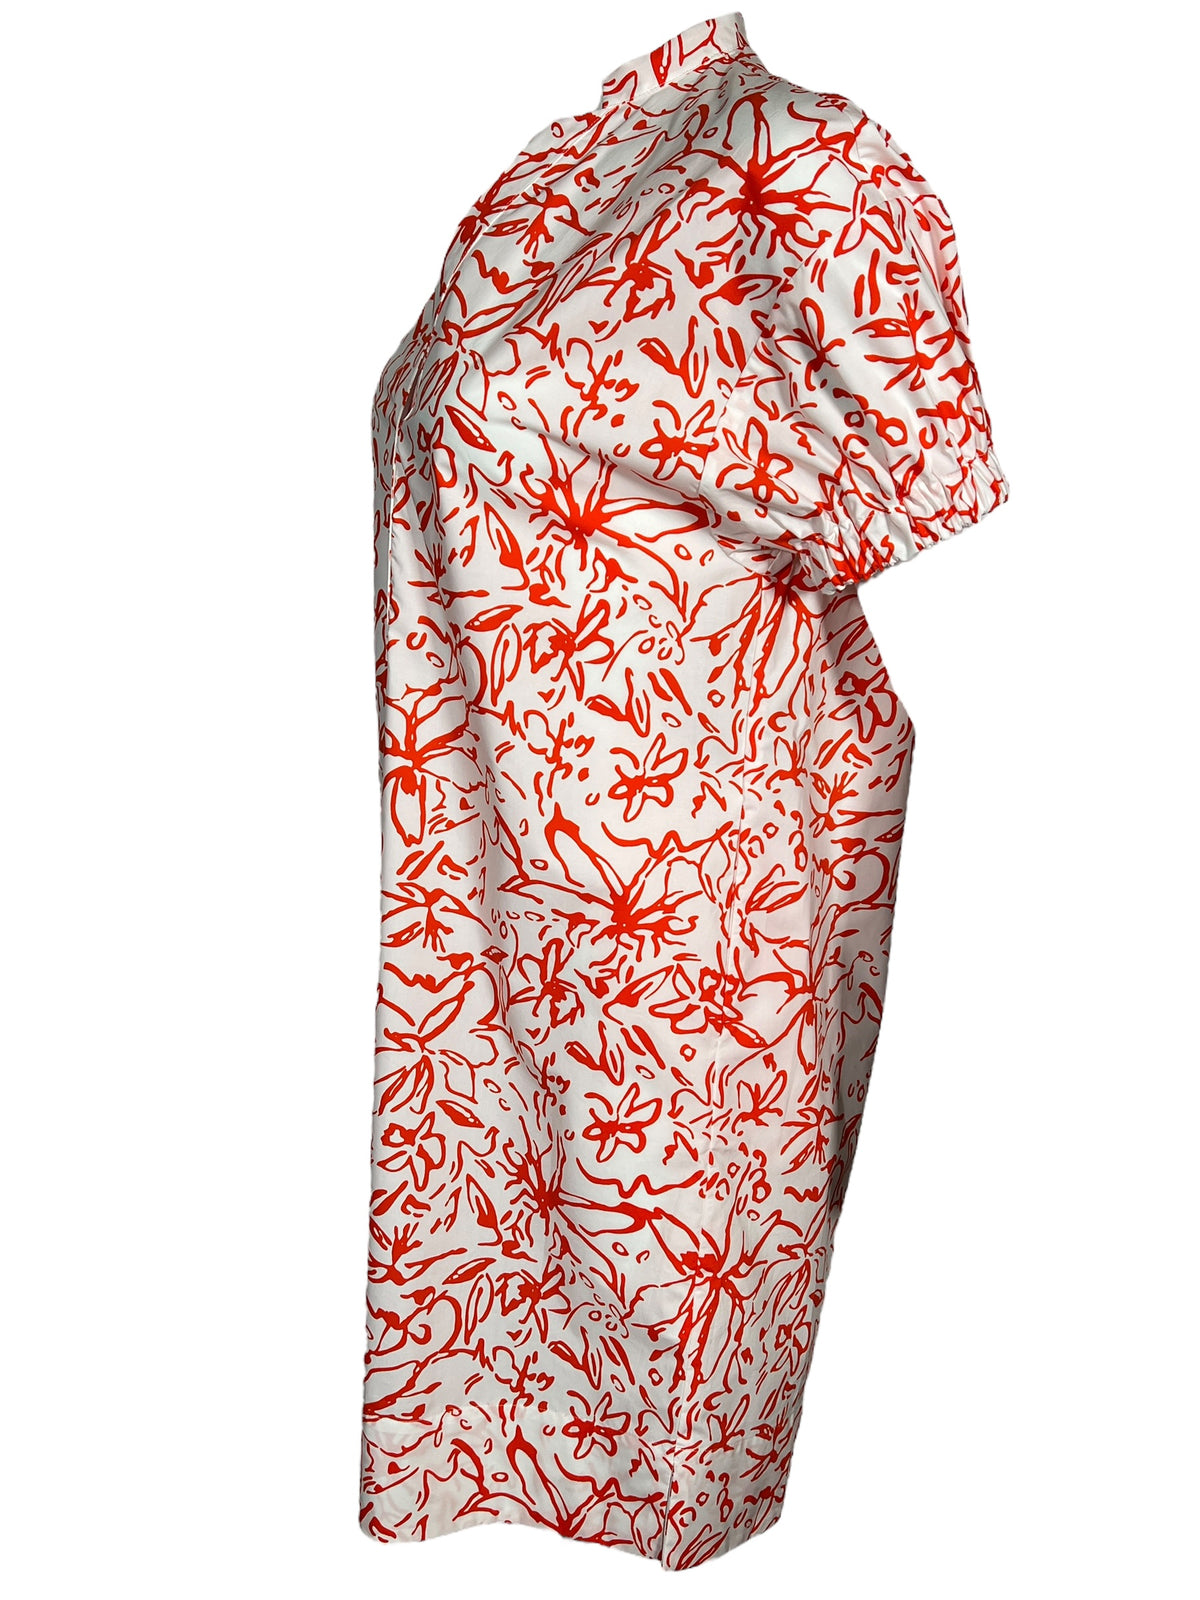 ROSSO 35 FLORAL POPLIN DRESS - RED/WHITE